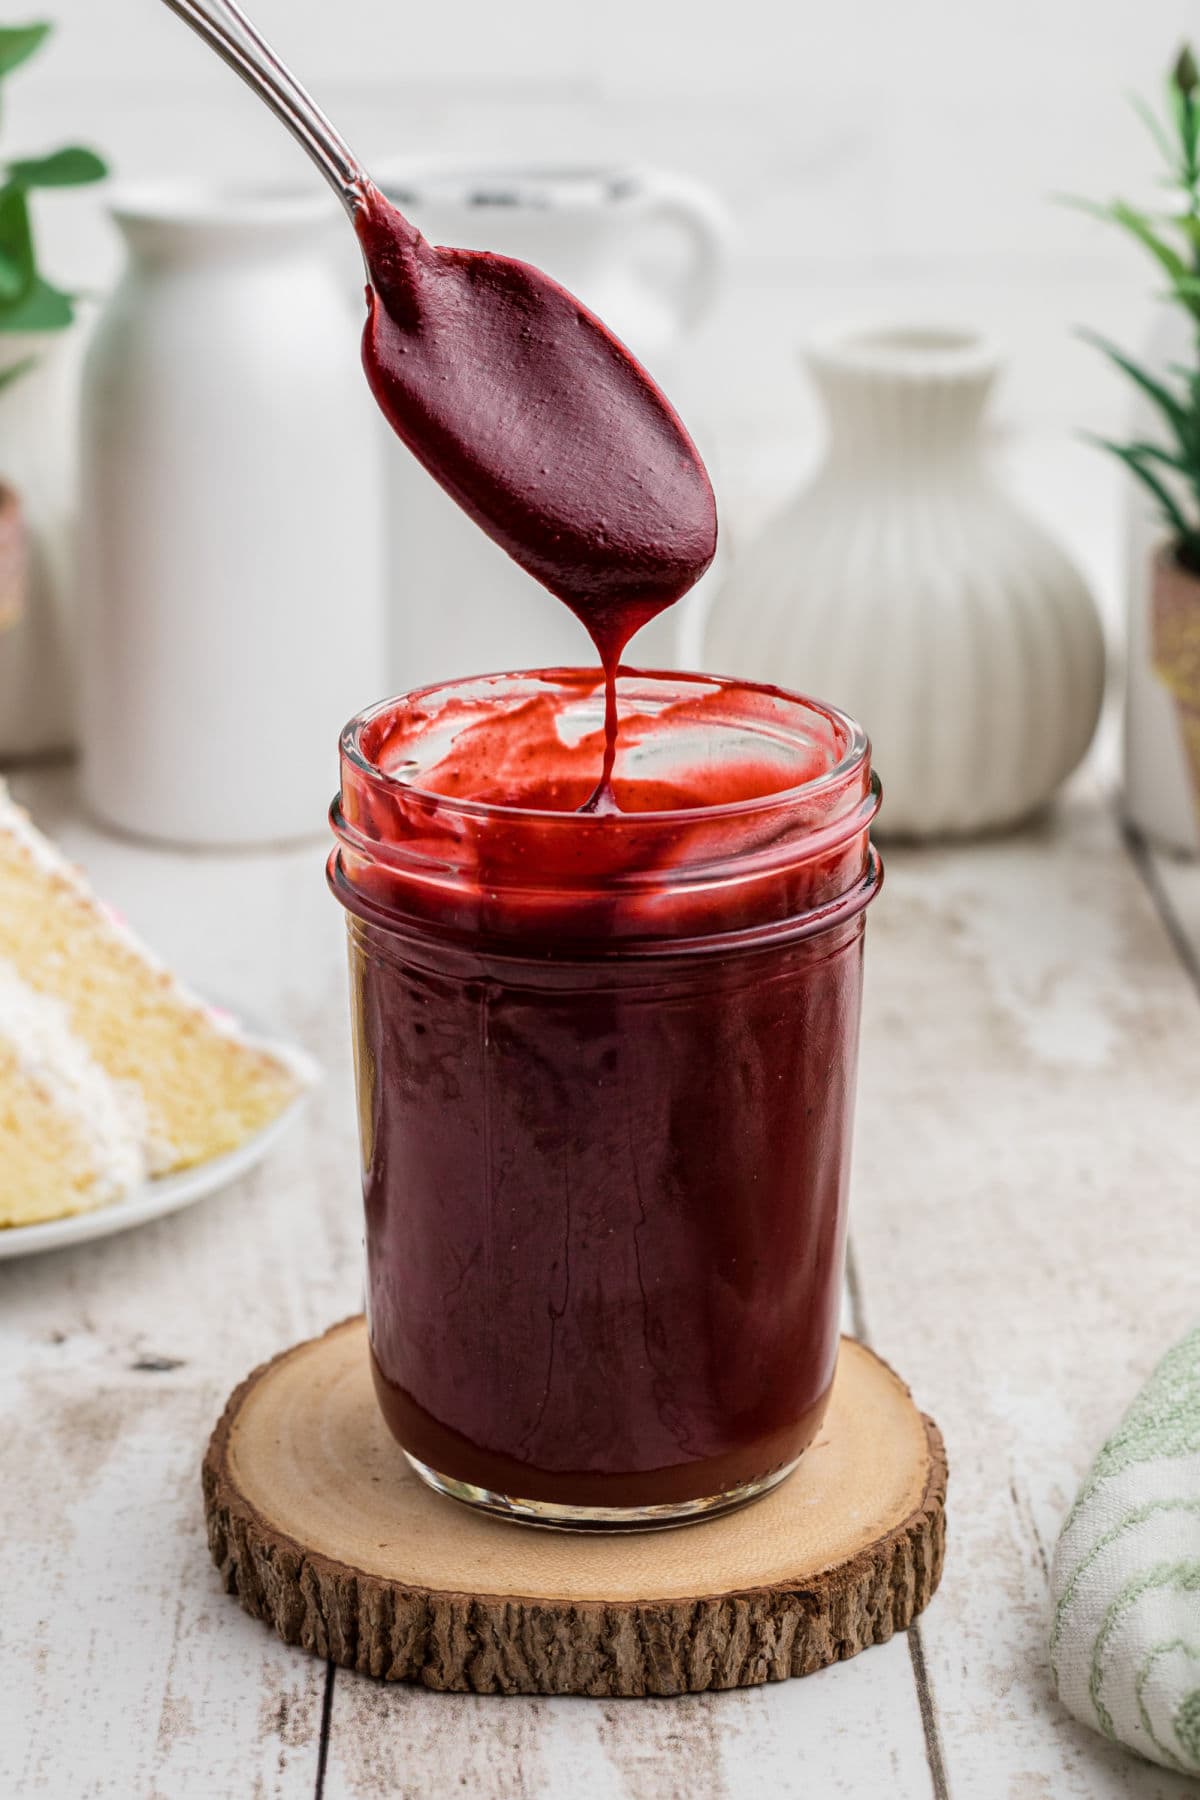 Red velvet hot fudge sauce being spooned into a jar.